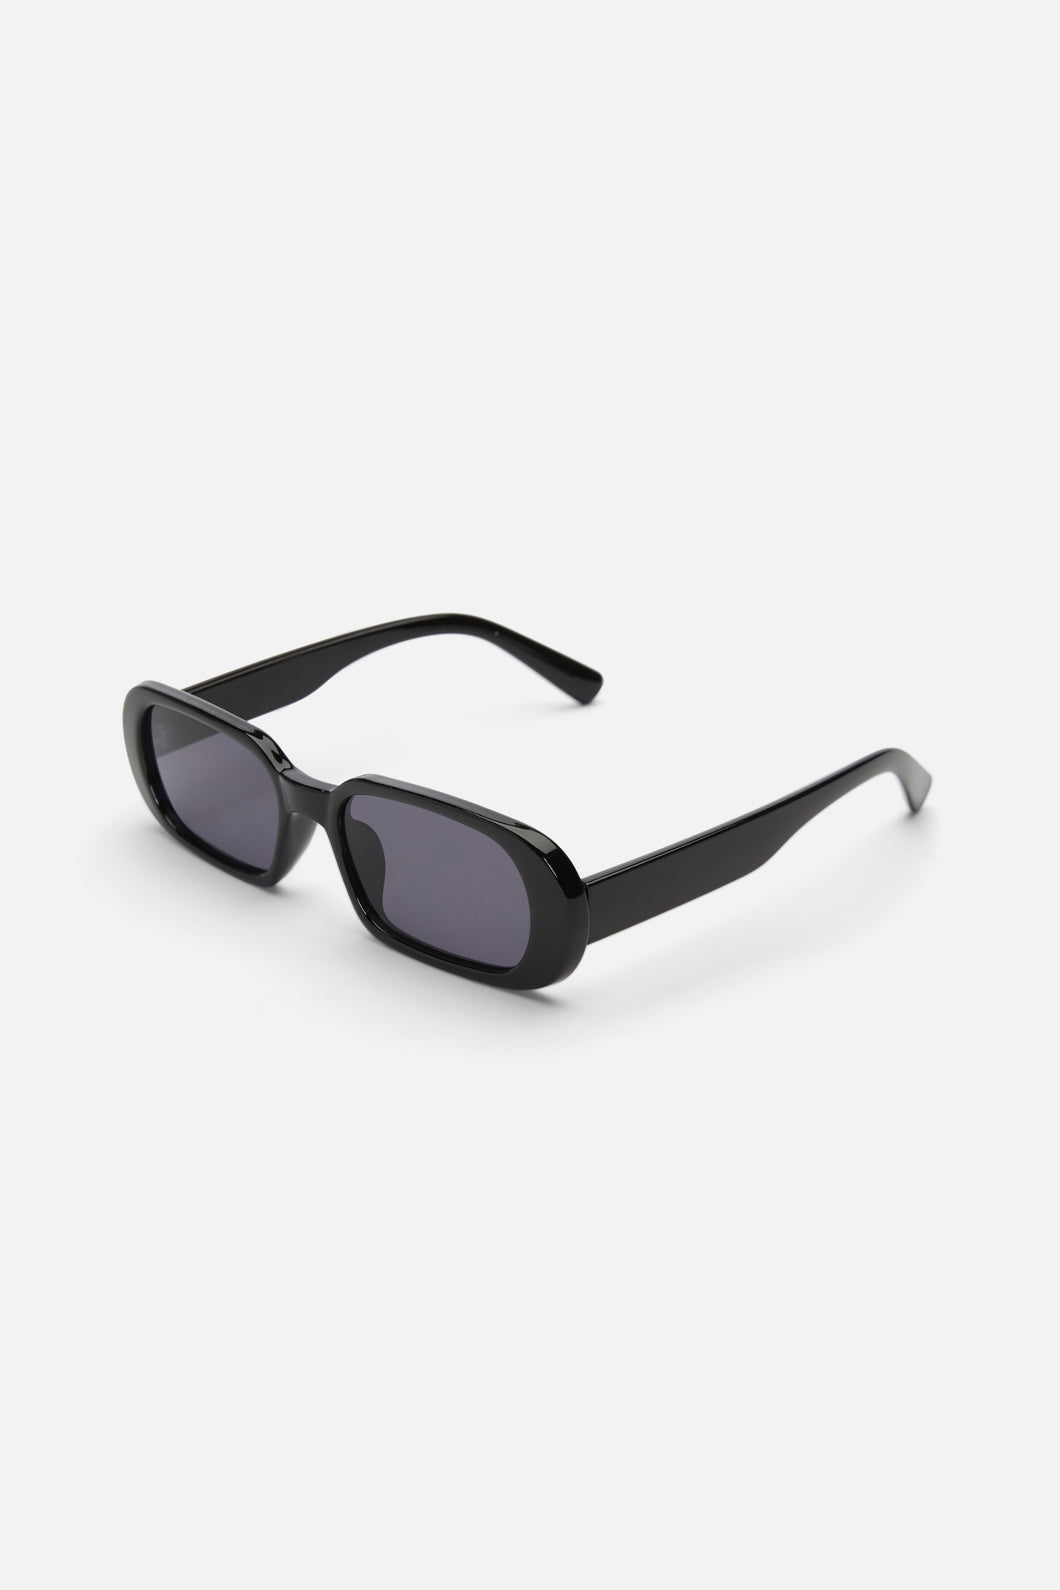 Small Round Gold Wire Frame Black Temple Tip Black Tinted Lens Sunglasses —  11DollarSunglasses.com